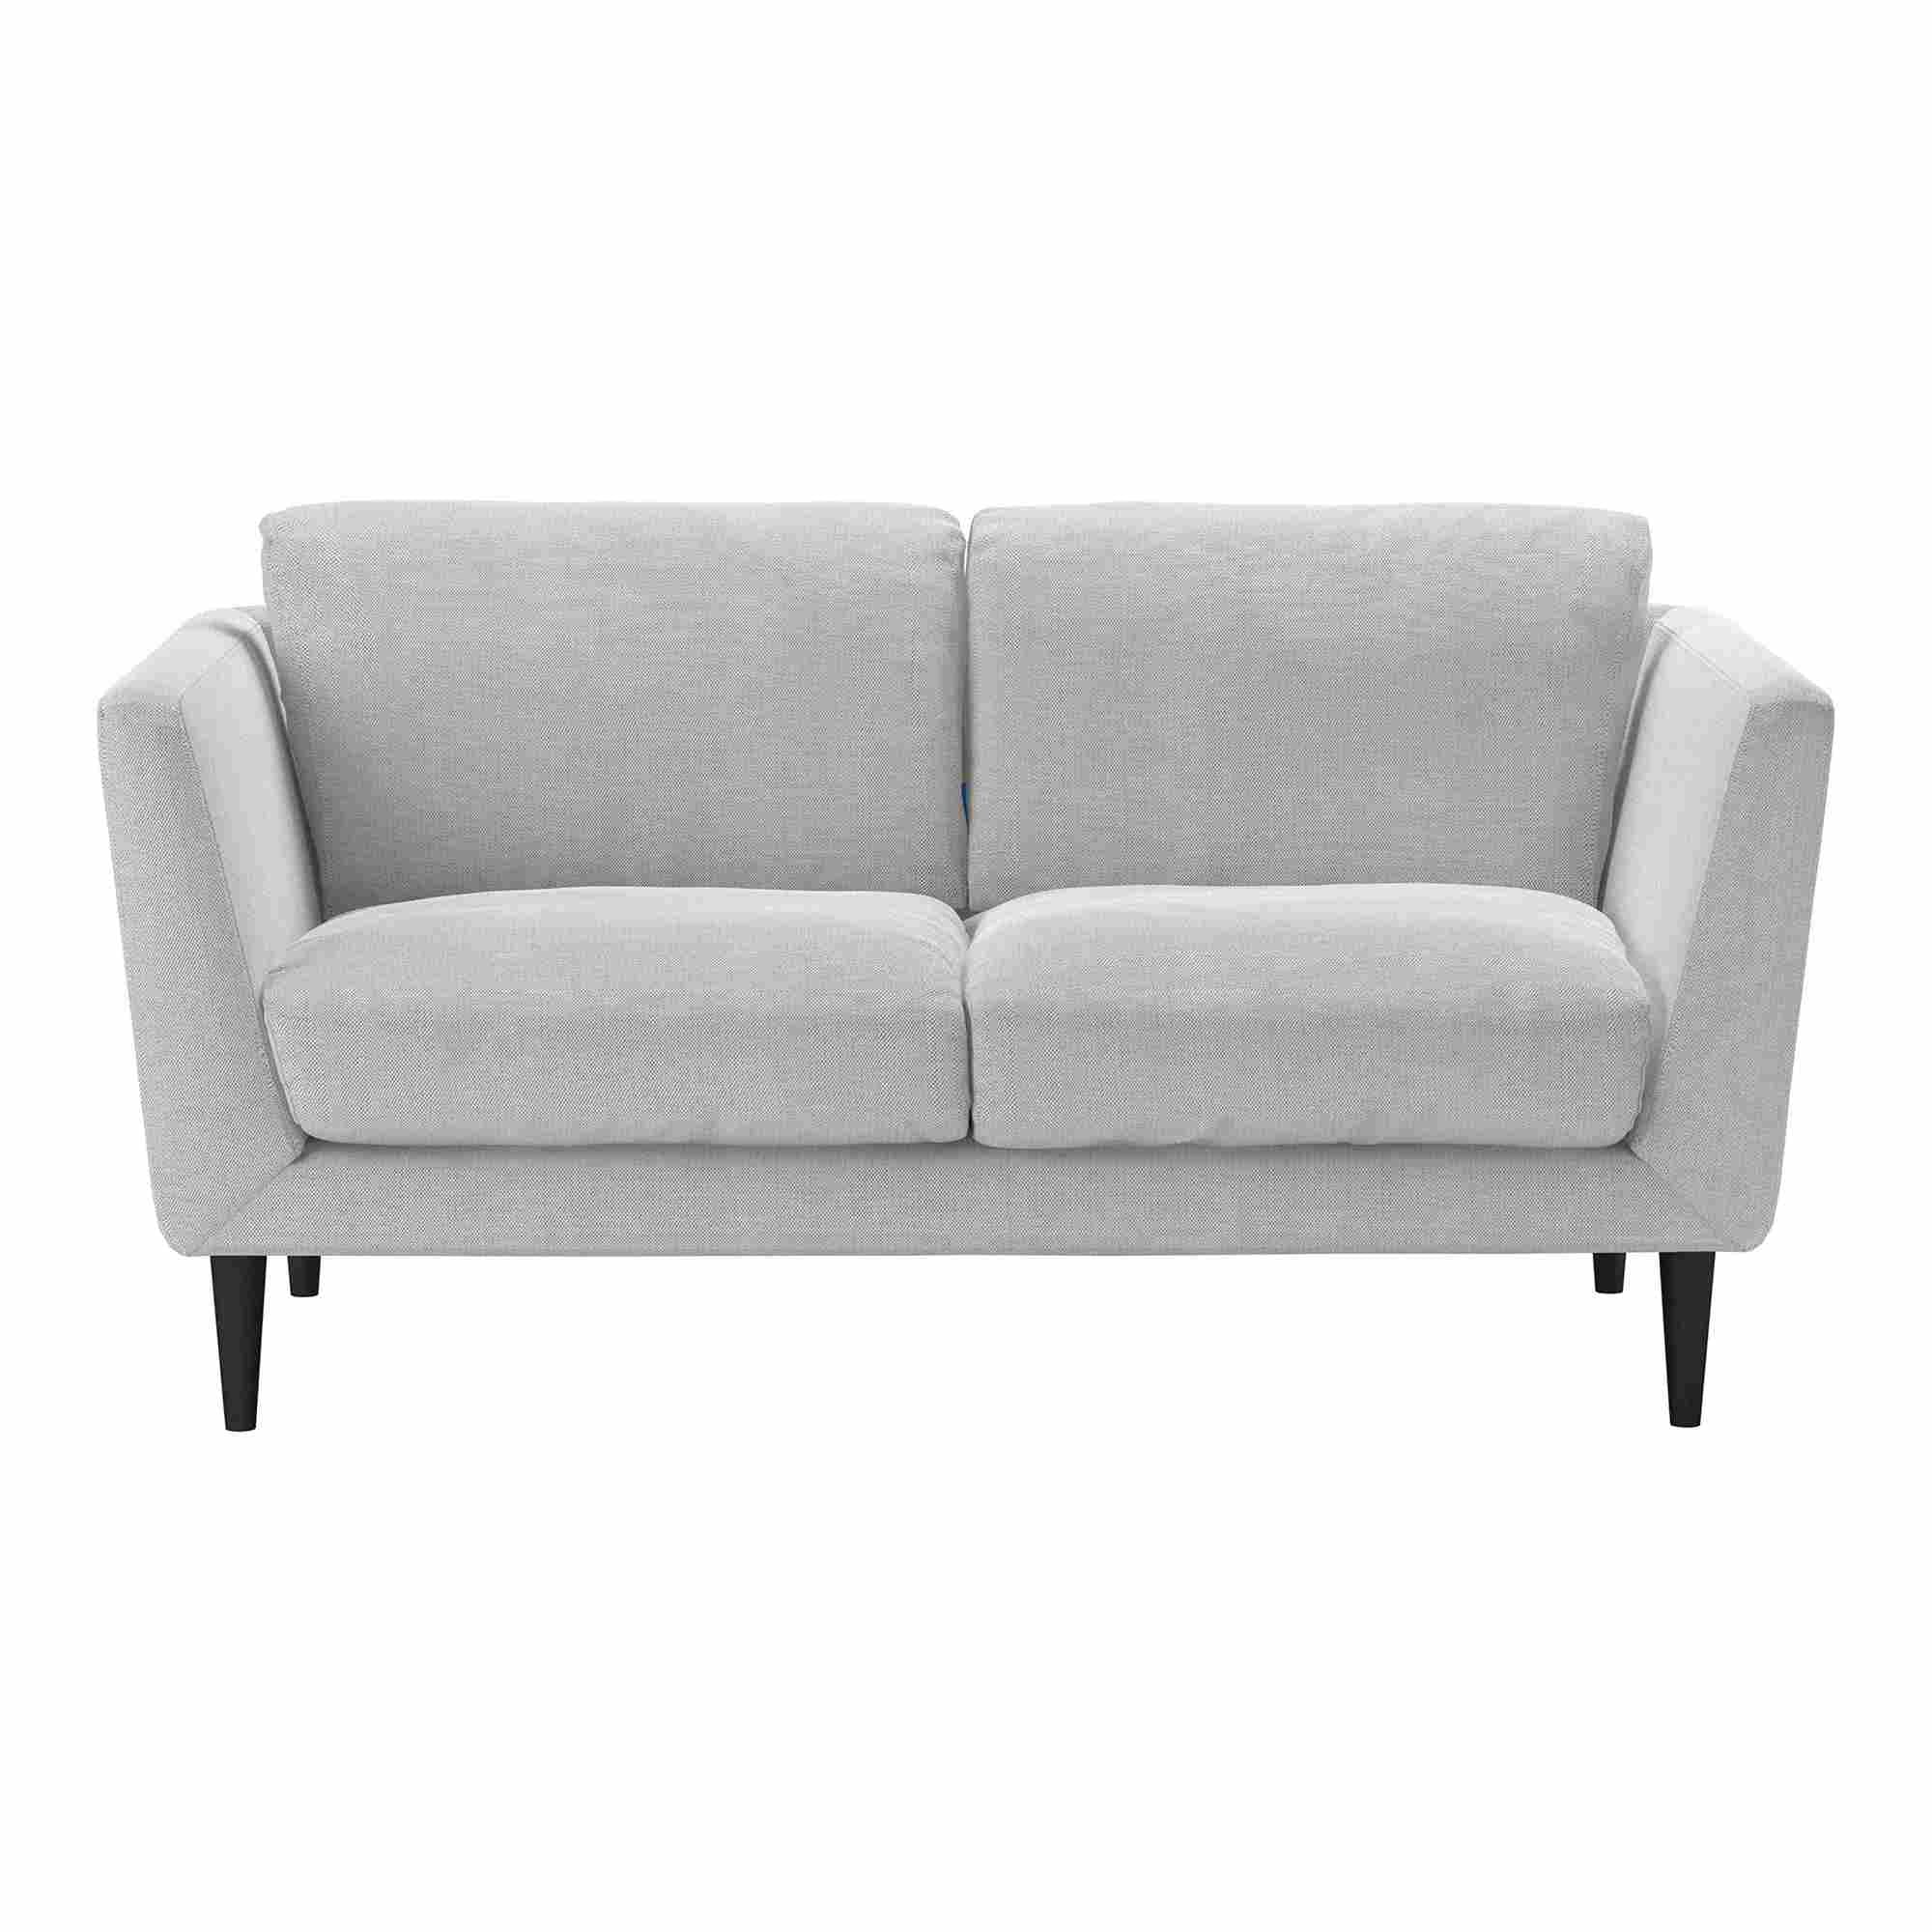 Holly Pumice House Basket Weave Sofa - 2 Seater